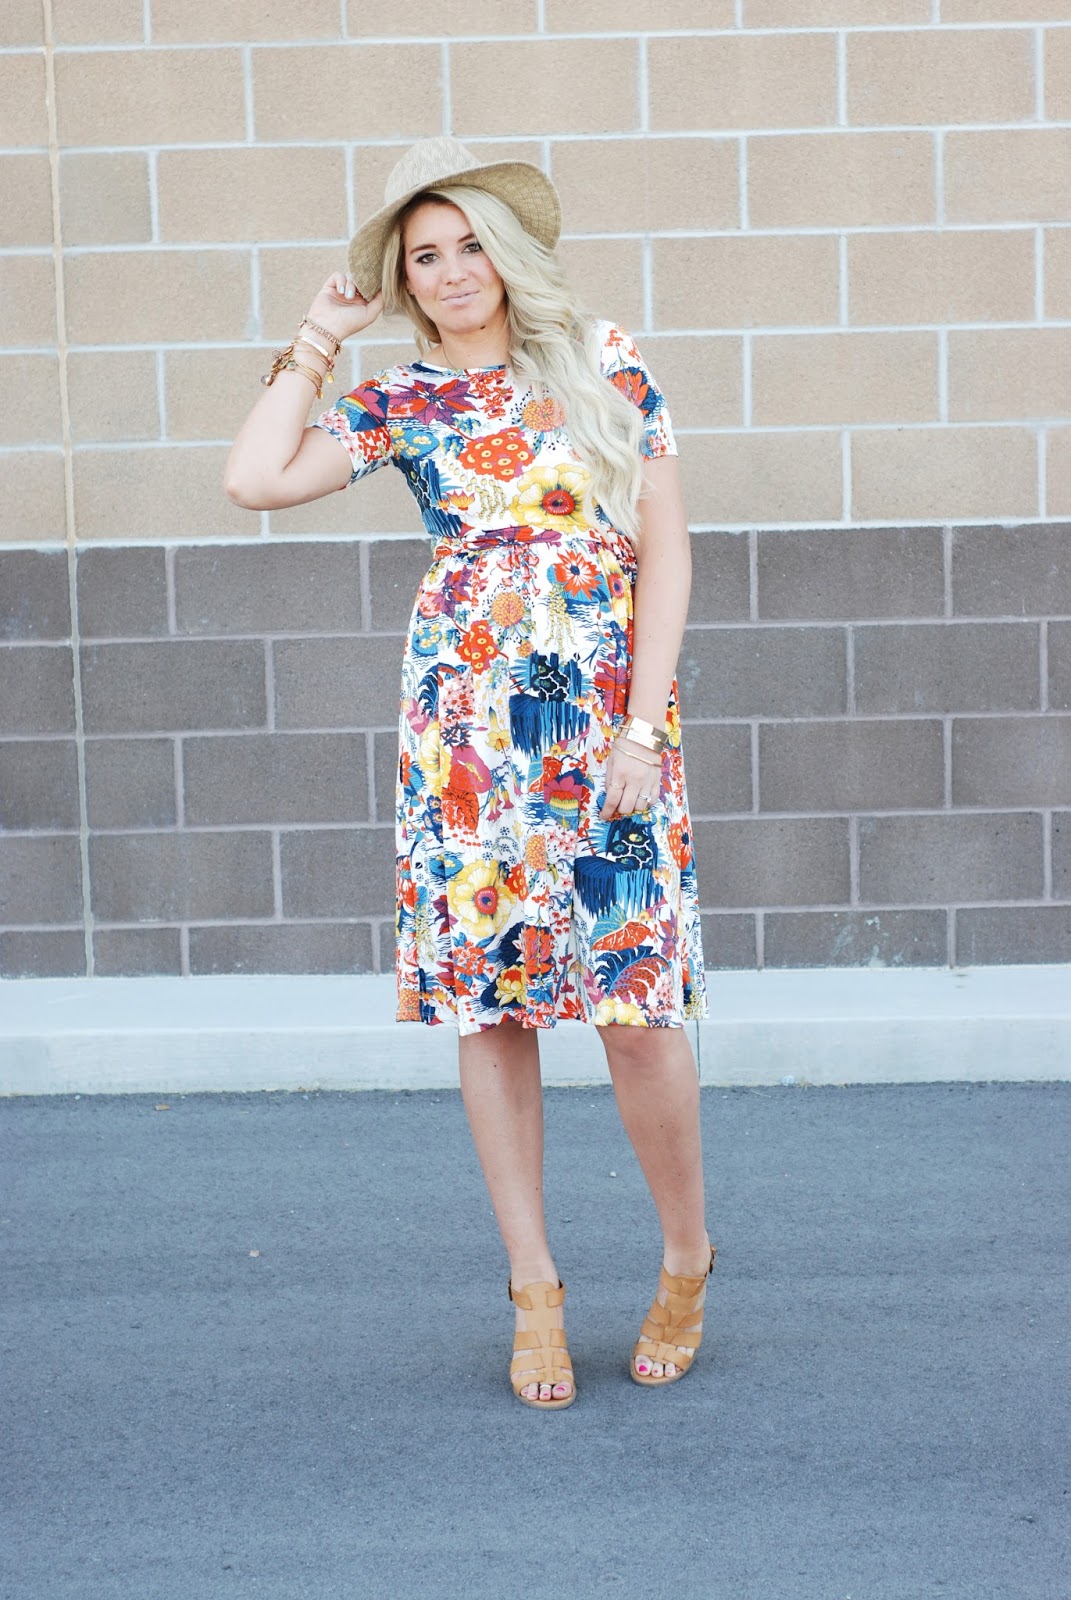 FLORAL DRESS FEATURING ZAFUL + #WIWT LINK UP! | The Red Closet Diary